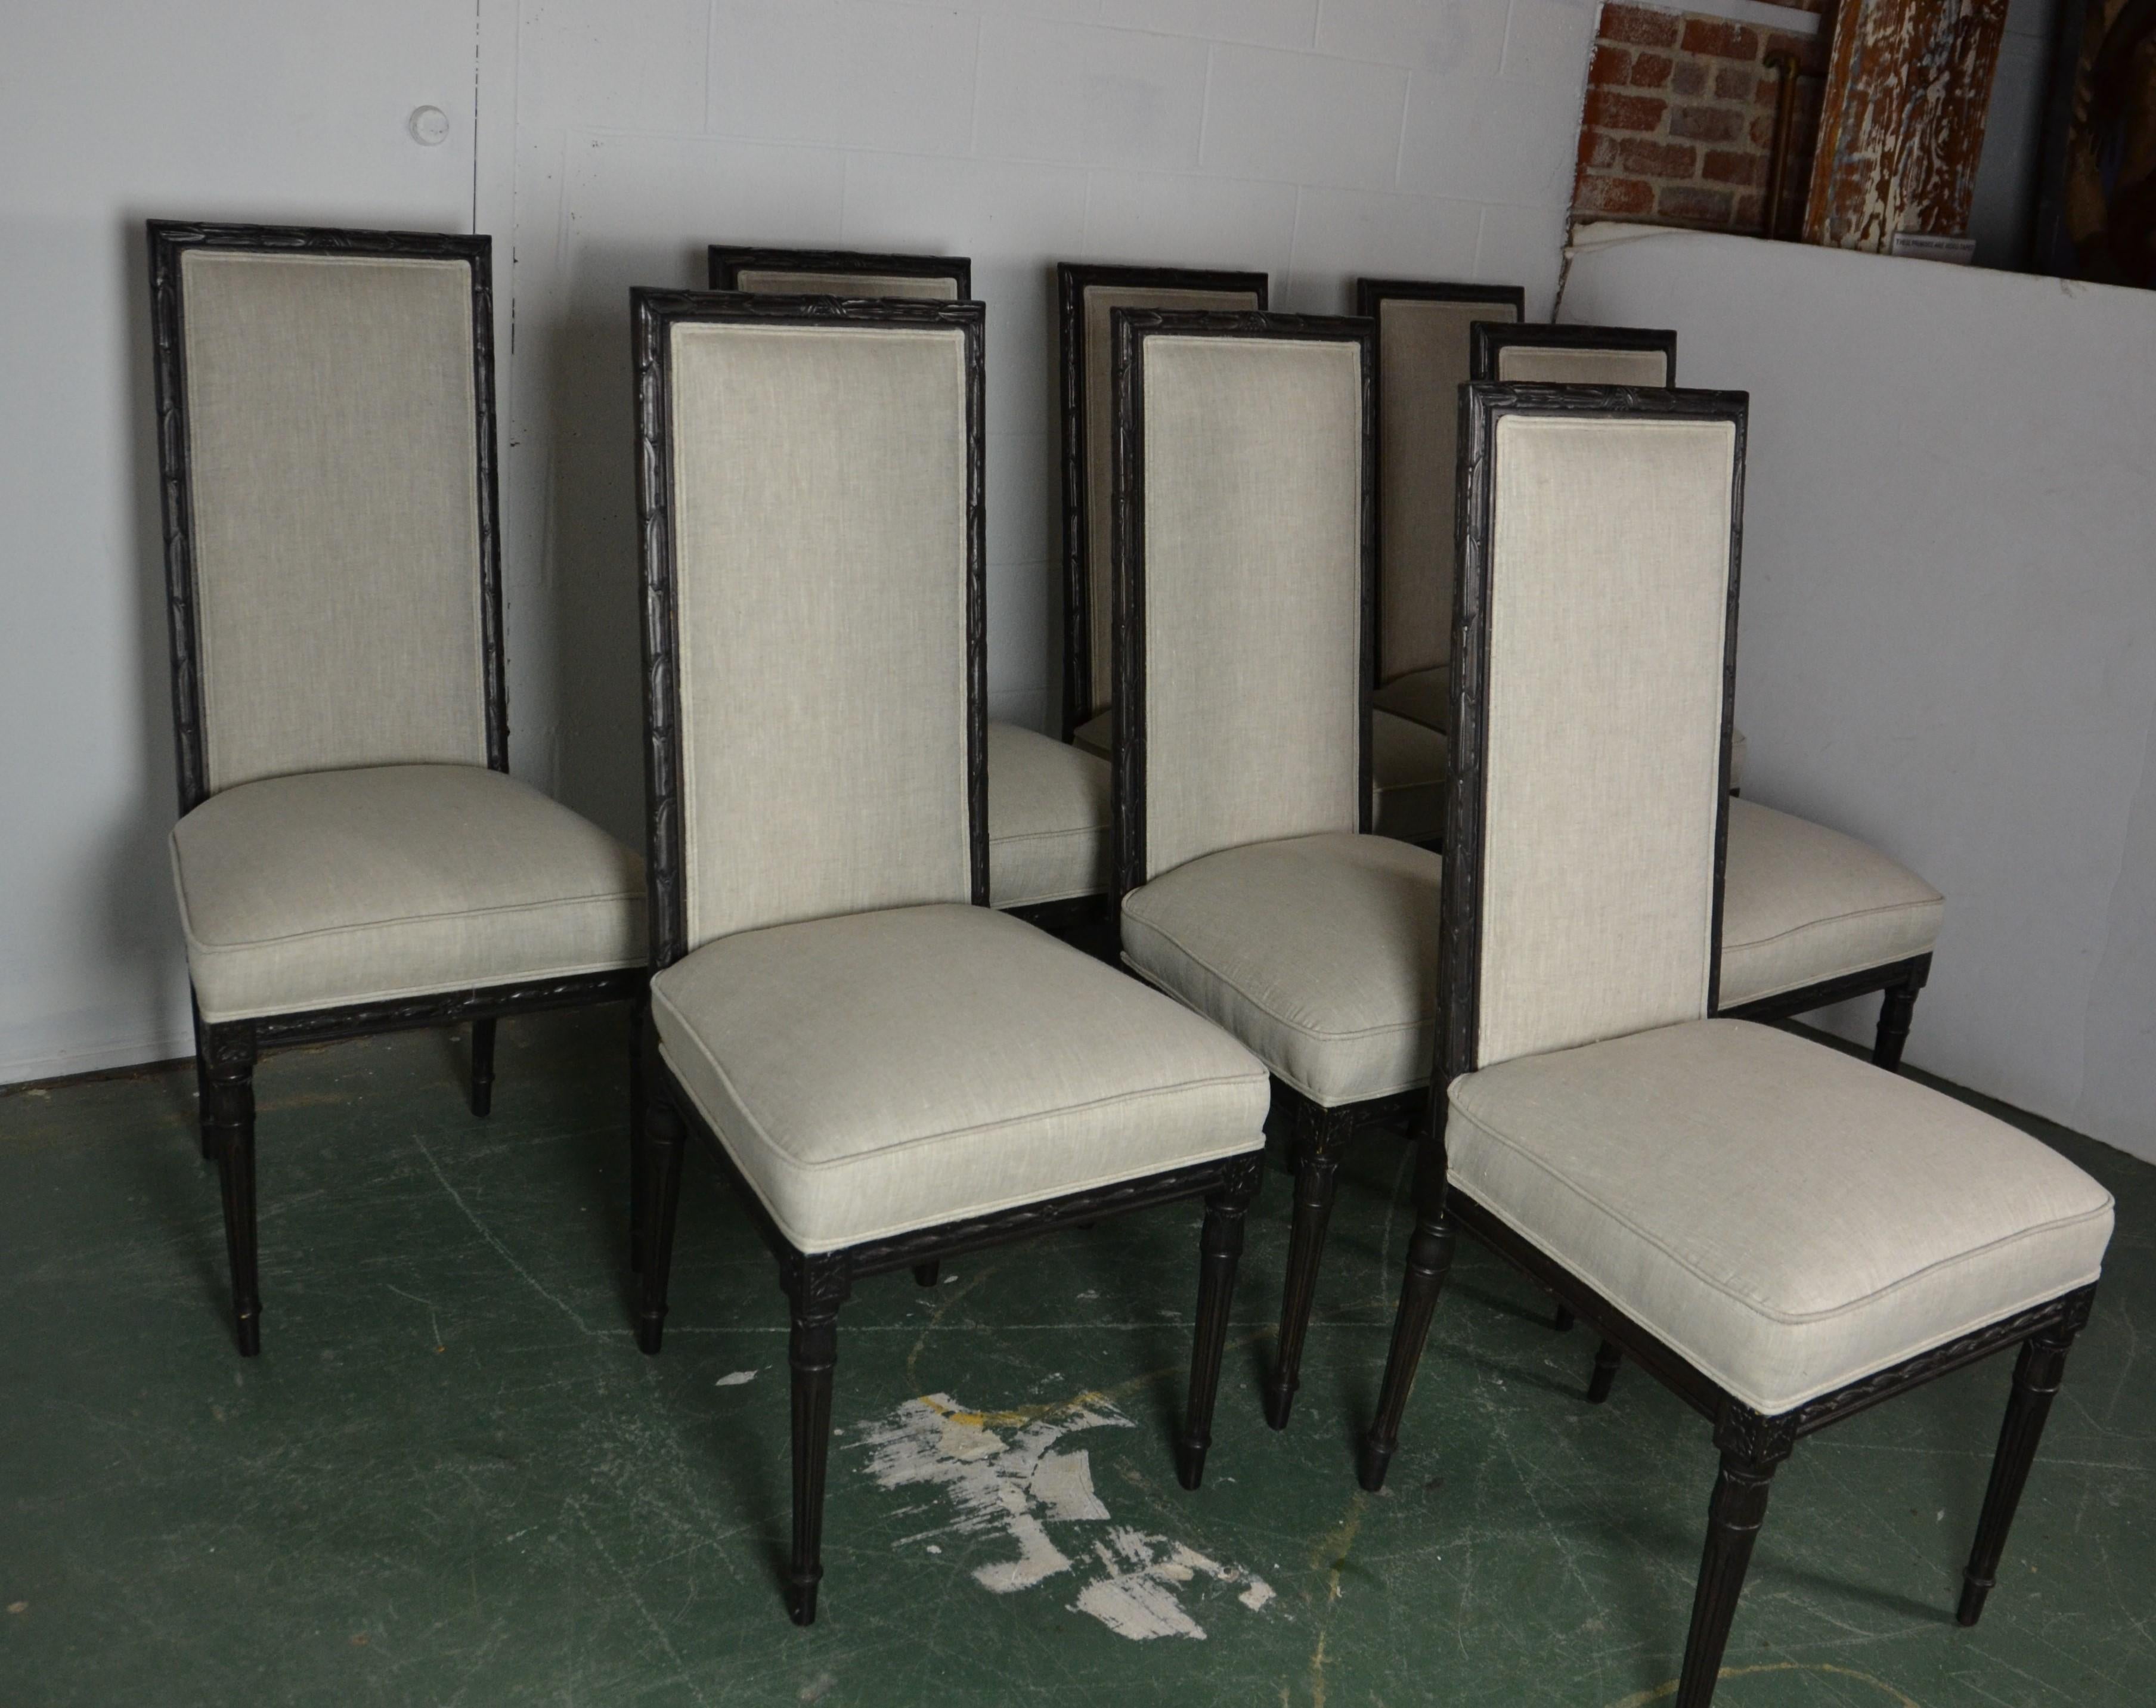 Set of eight Louis XVI style dining chairs. Upholstered in light gray linen. The frame is a black finish.